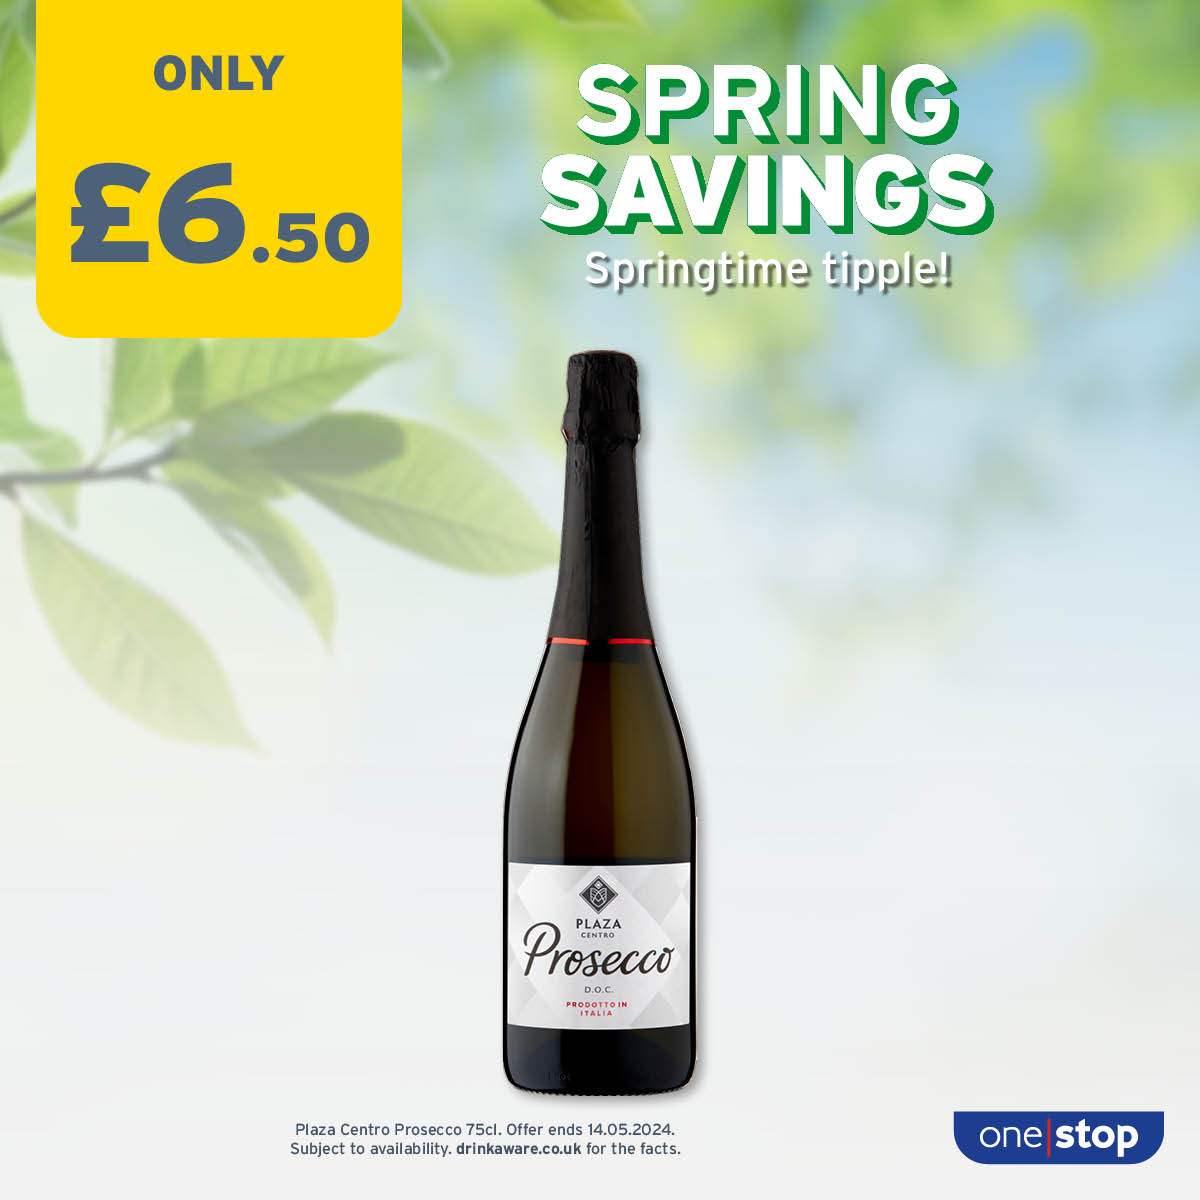 Get your Prosecco fix for less this bank holiday weekend 🥂 Find your local store 👉 onestop.co.uk/store-finder/ Subject to availability. Participating stores only. Visit drinkaware.co.uk for the facts